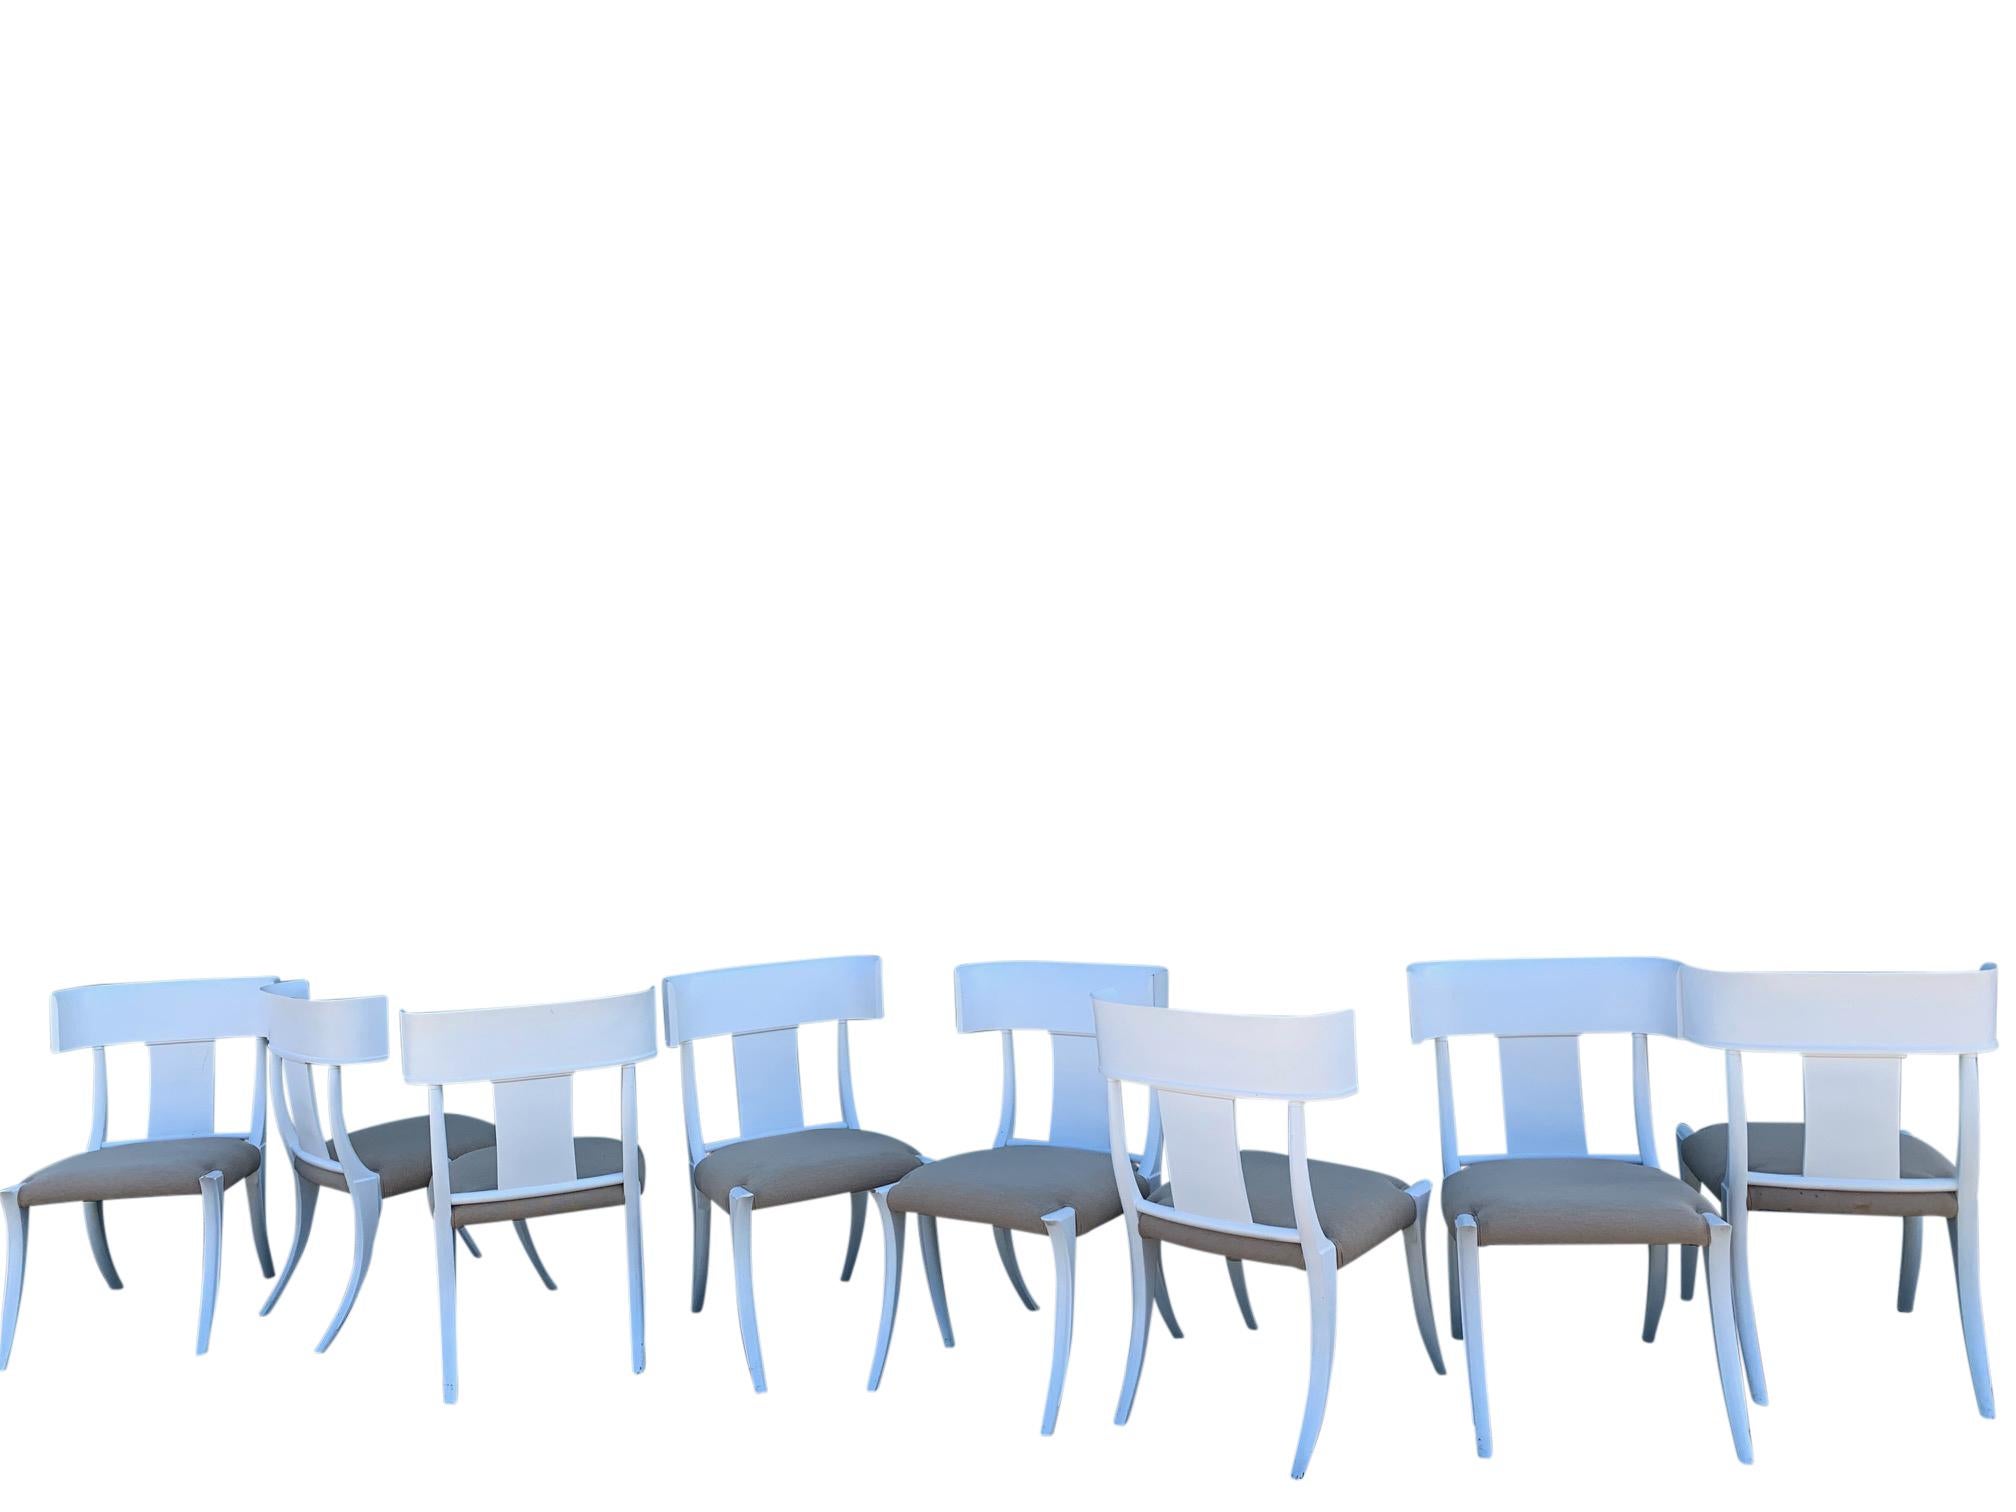 Set of 8 Klismos wood dining chairs in style of Stewart Macdougall for Glenn of California.